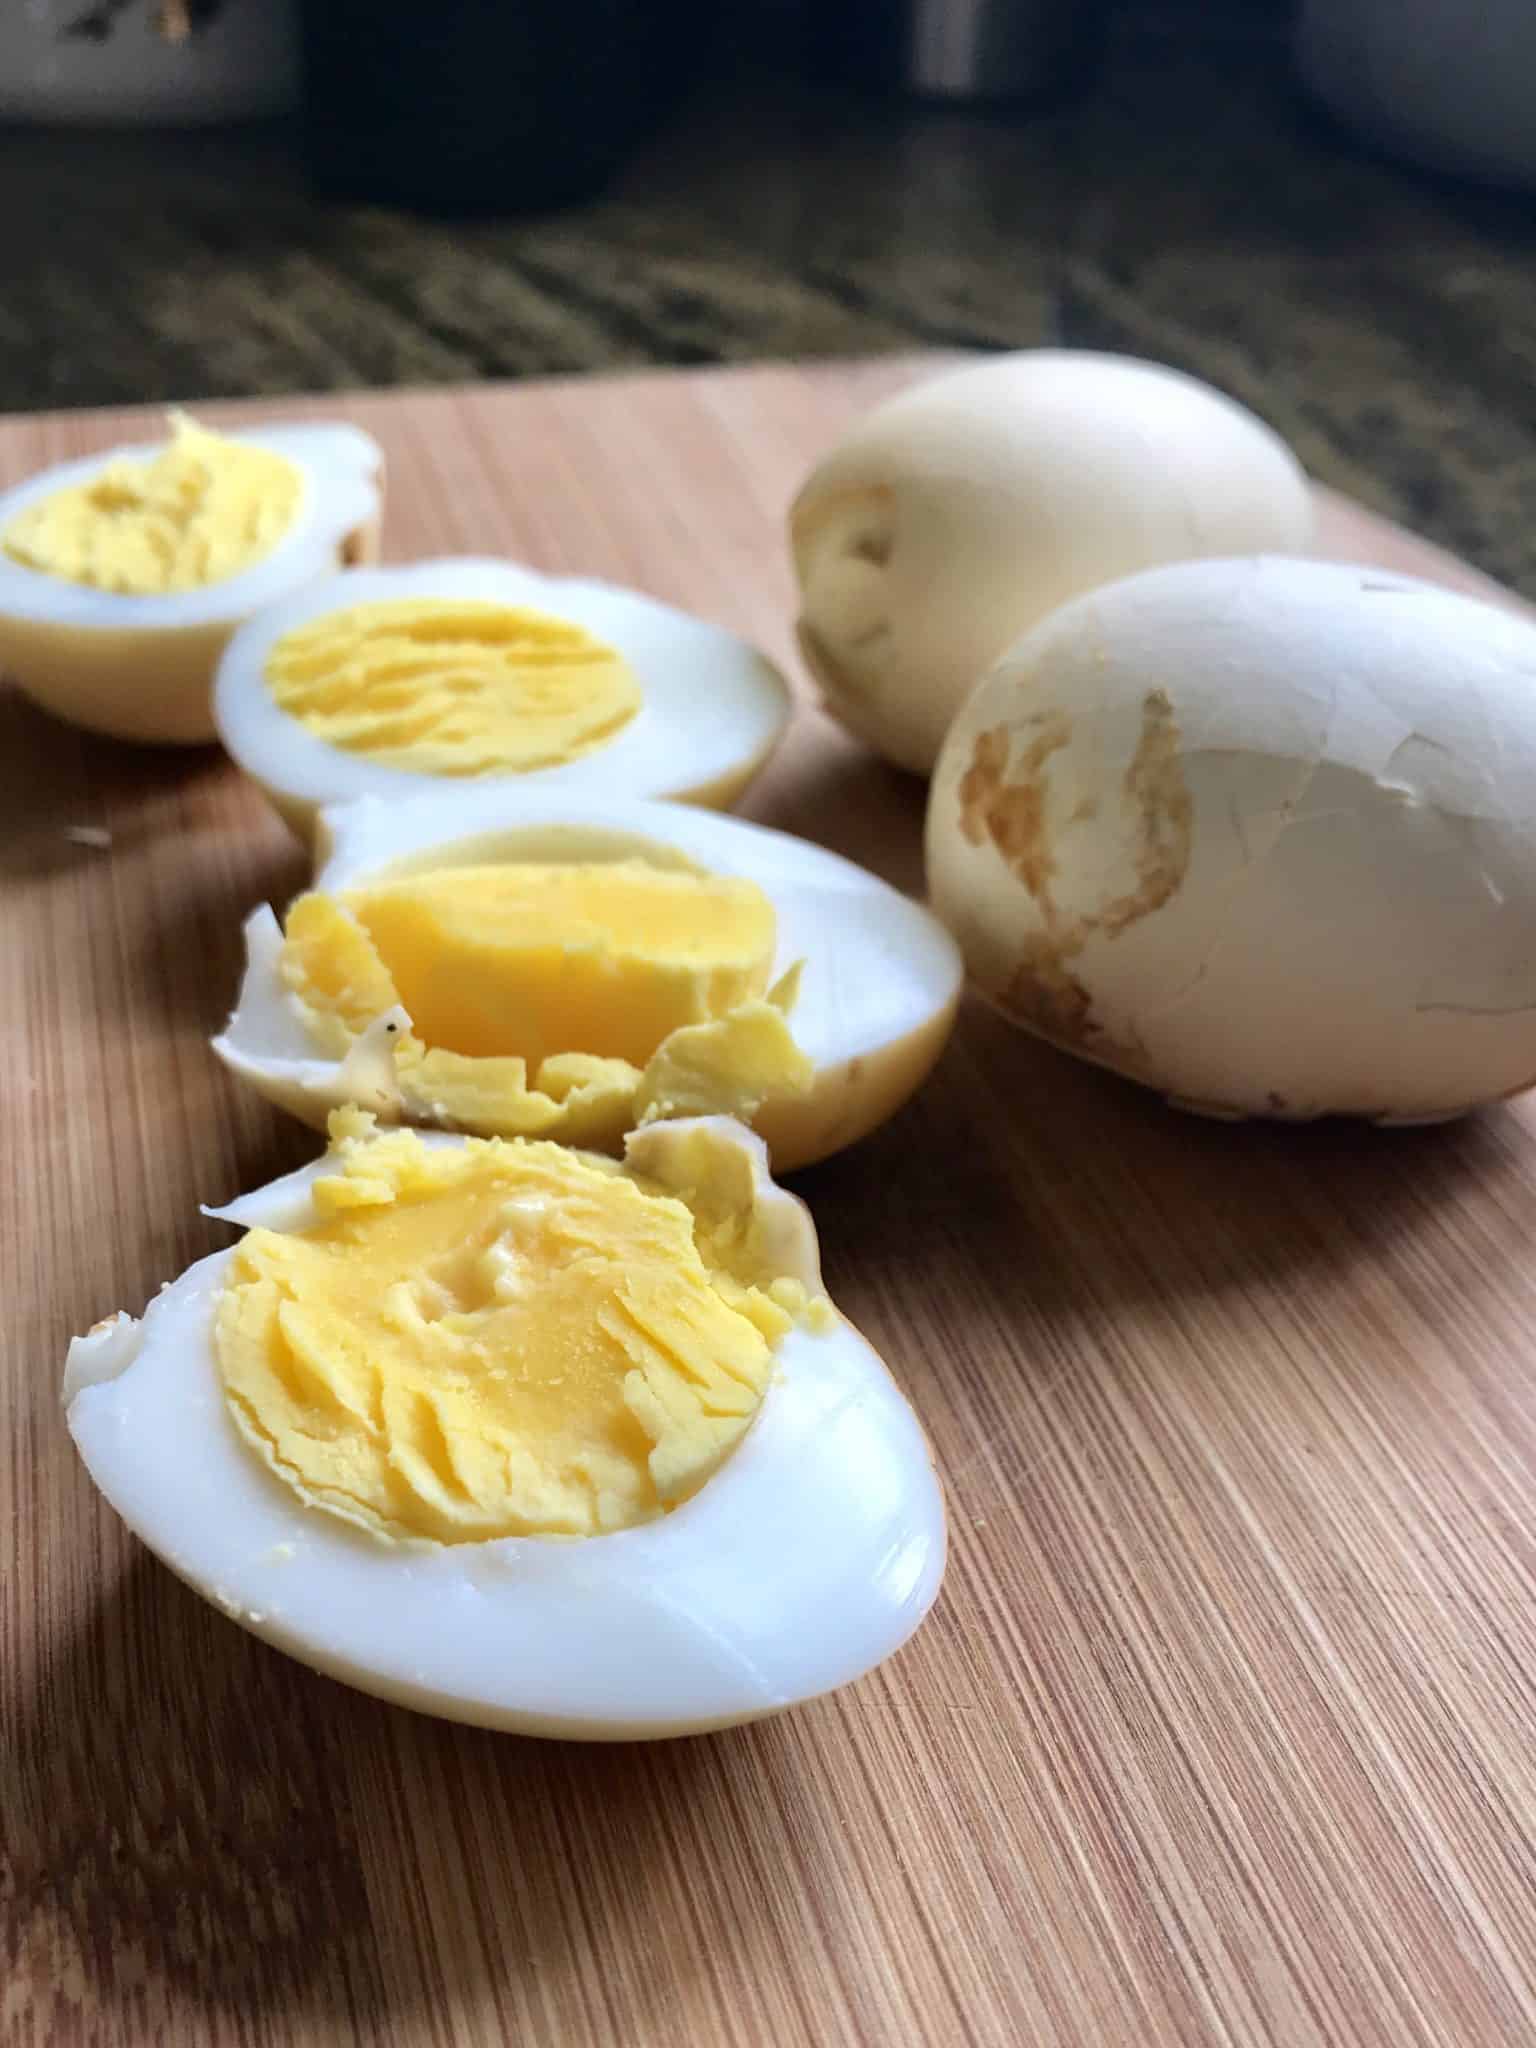 Smoked Eggs sliced in half sitting on wooden cutting board close up view